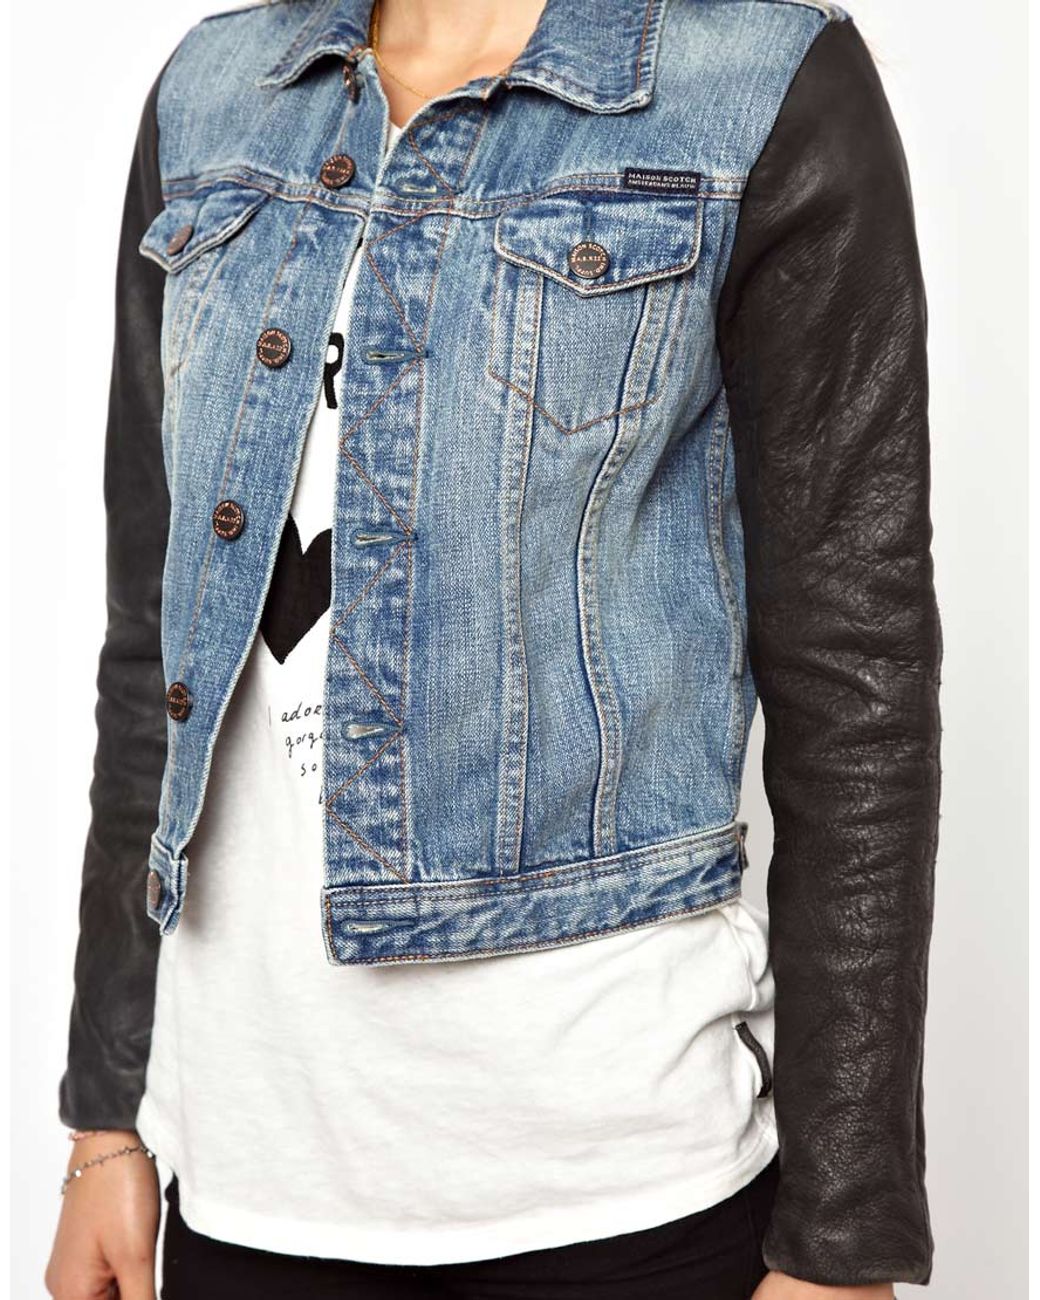 ASOS Maison Scotch Denim Jacket with Leather Sleeves in Black | Lyst